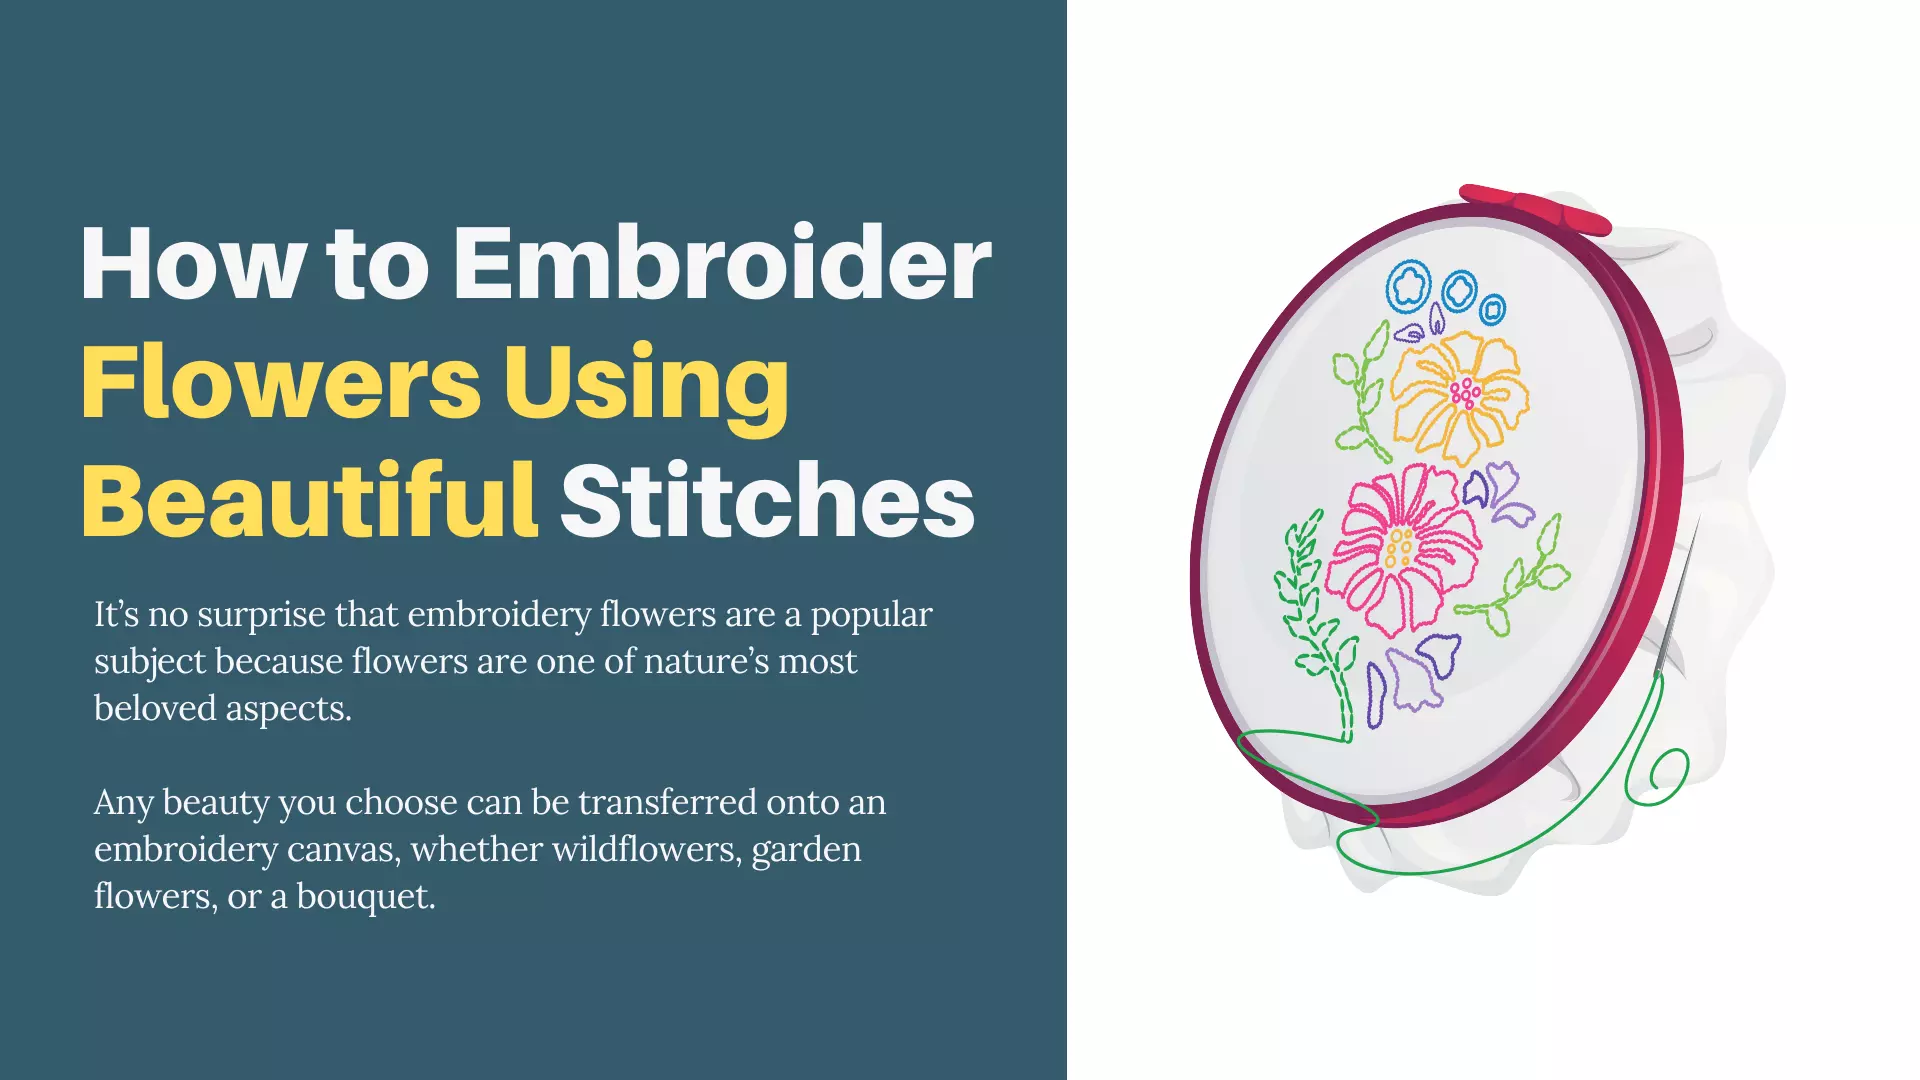 How to Embroider Flowers Using Beautiful Stitches